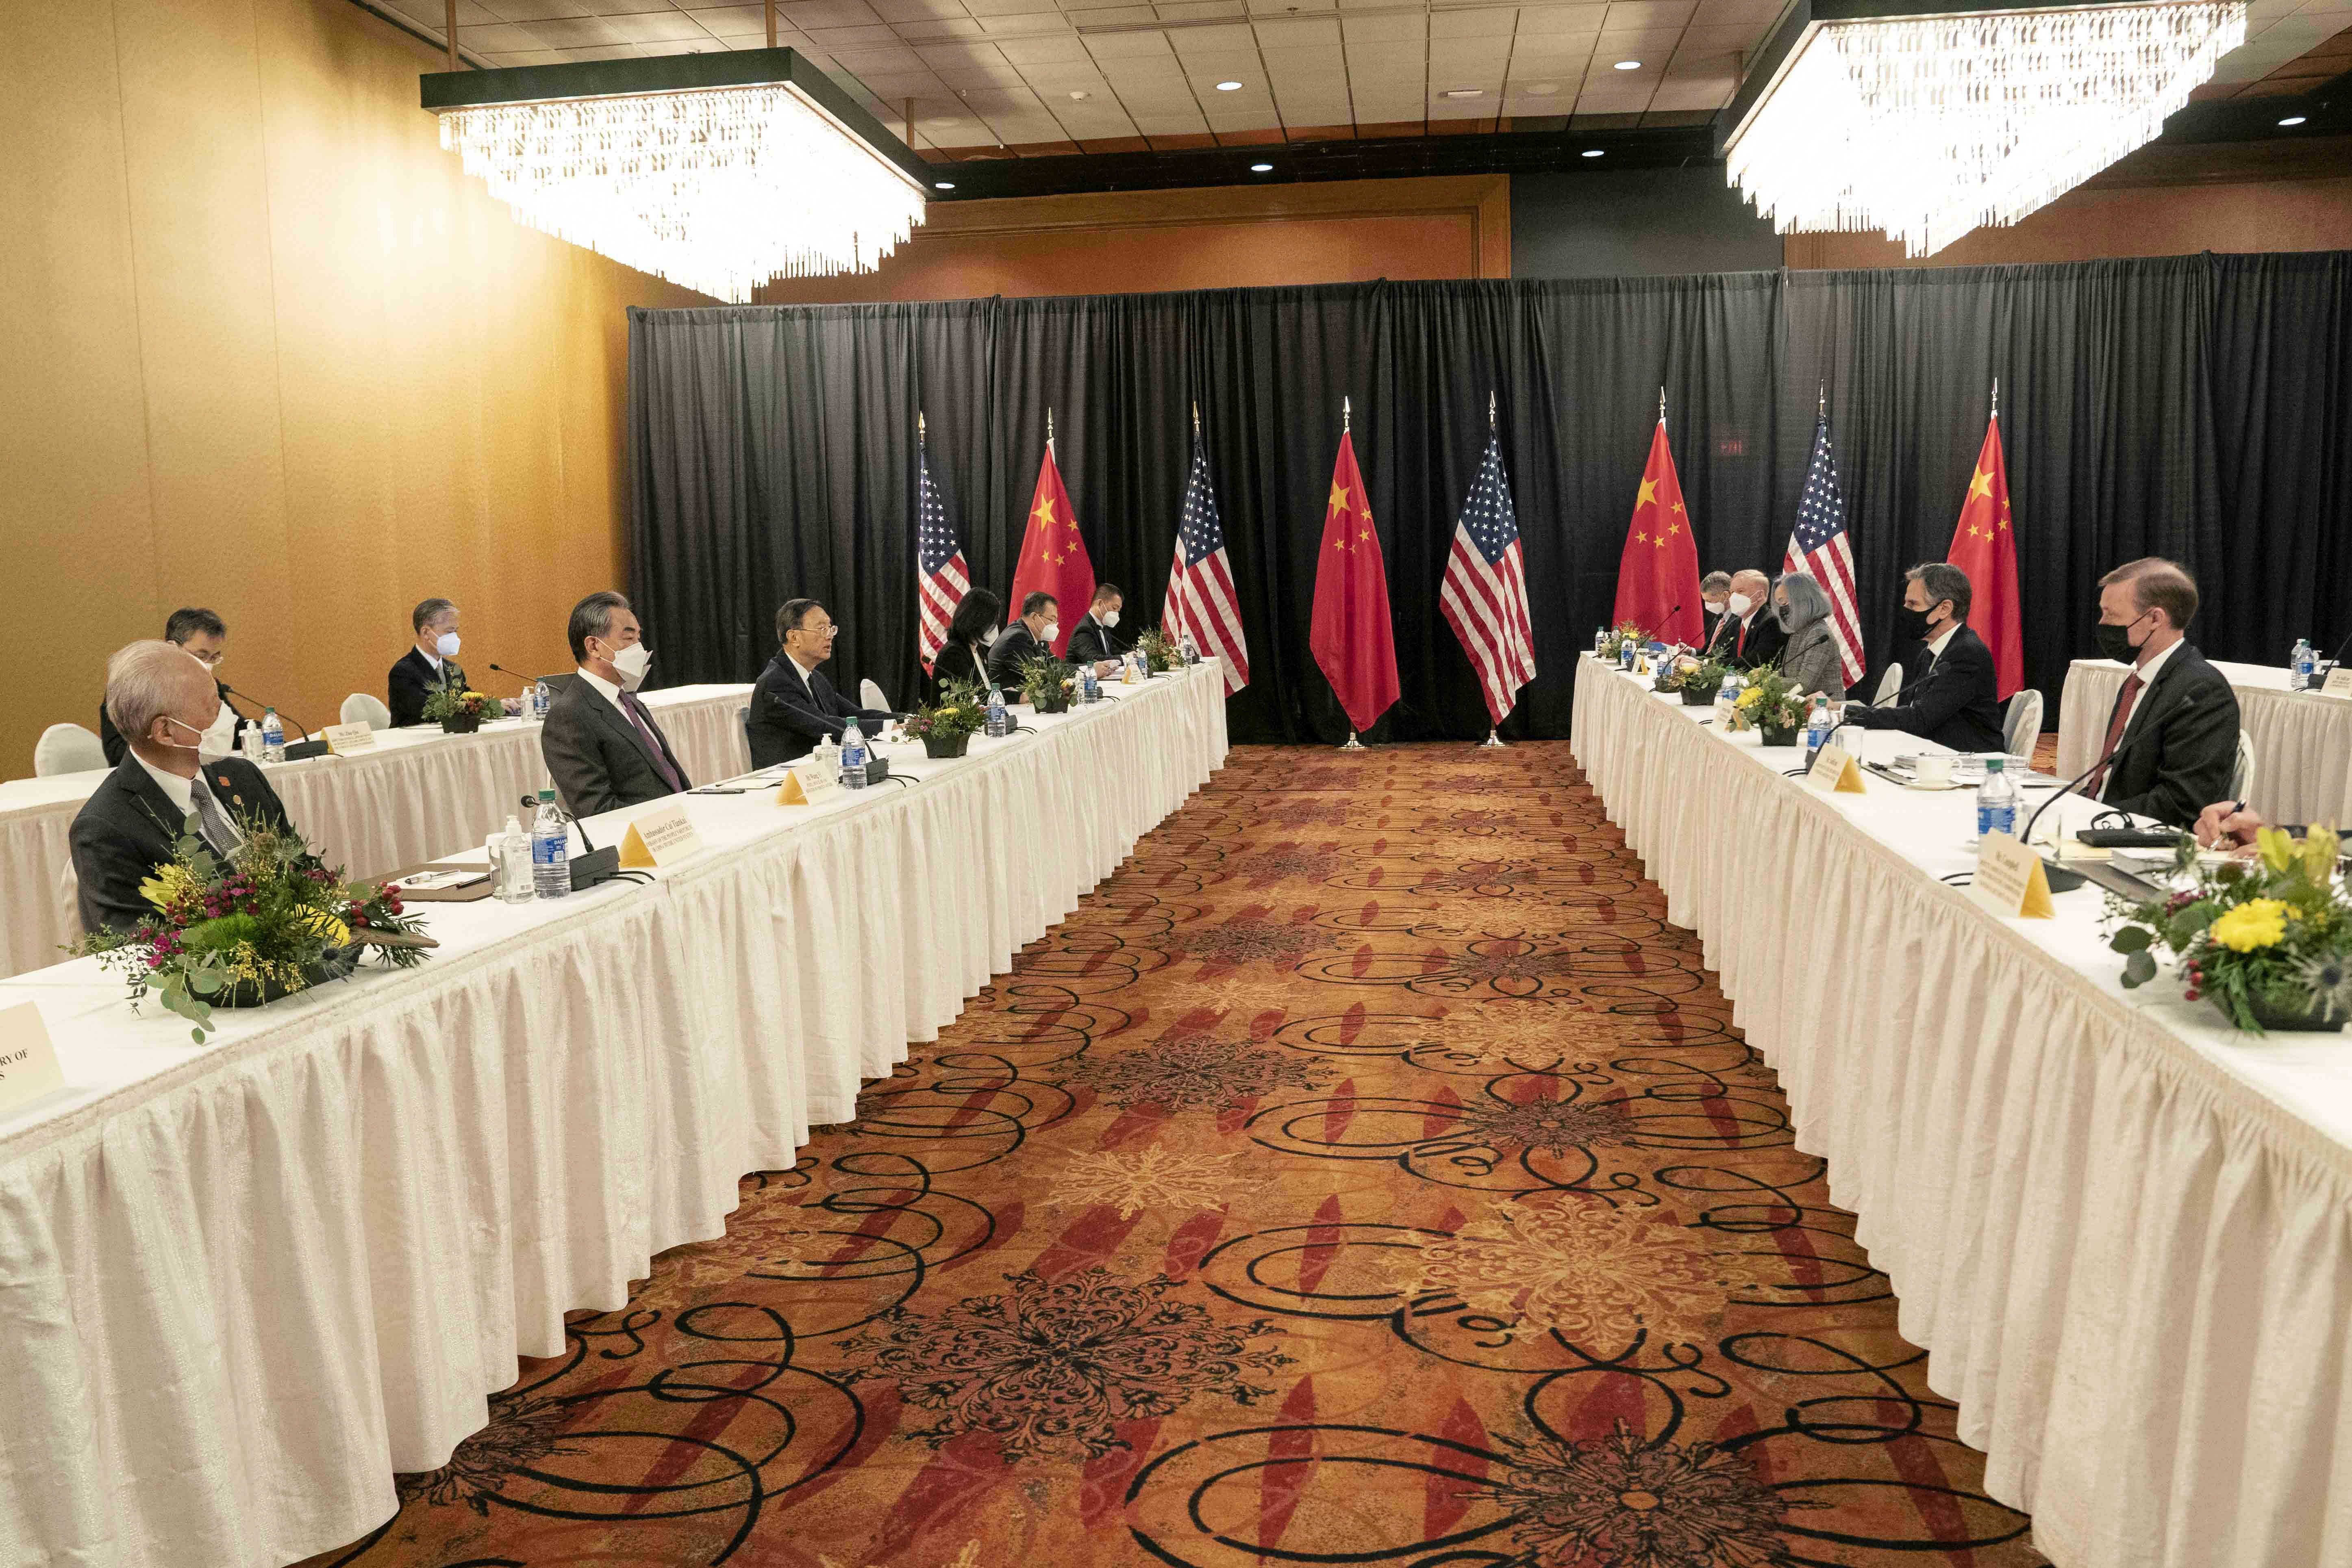 Yang Jiechi (front row, third from left) and Antony Blinken (second from right) trade insults during the high-level strategic meeting in Anchorage